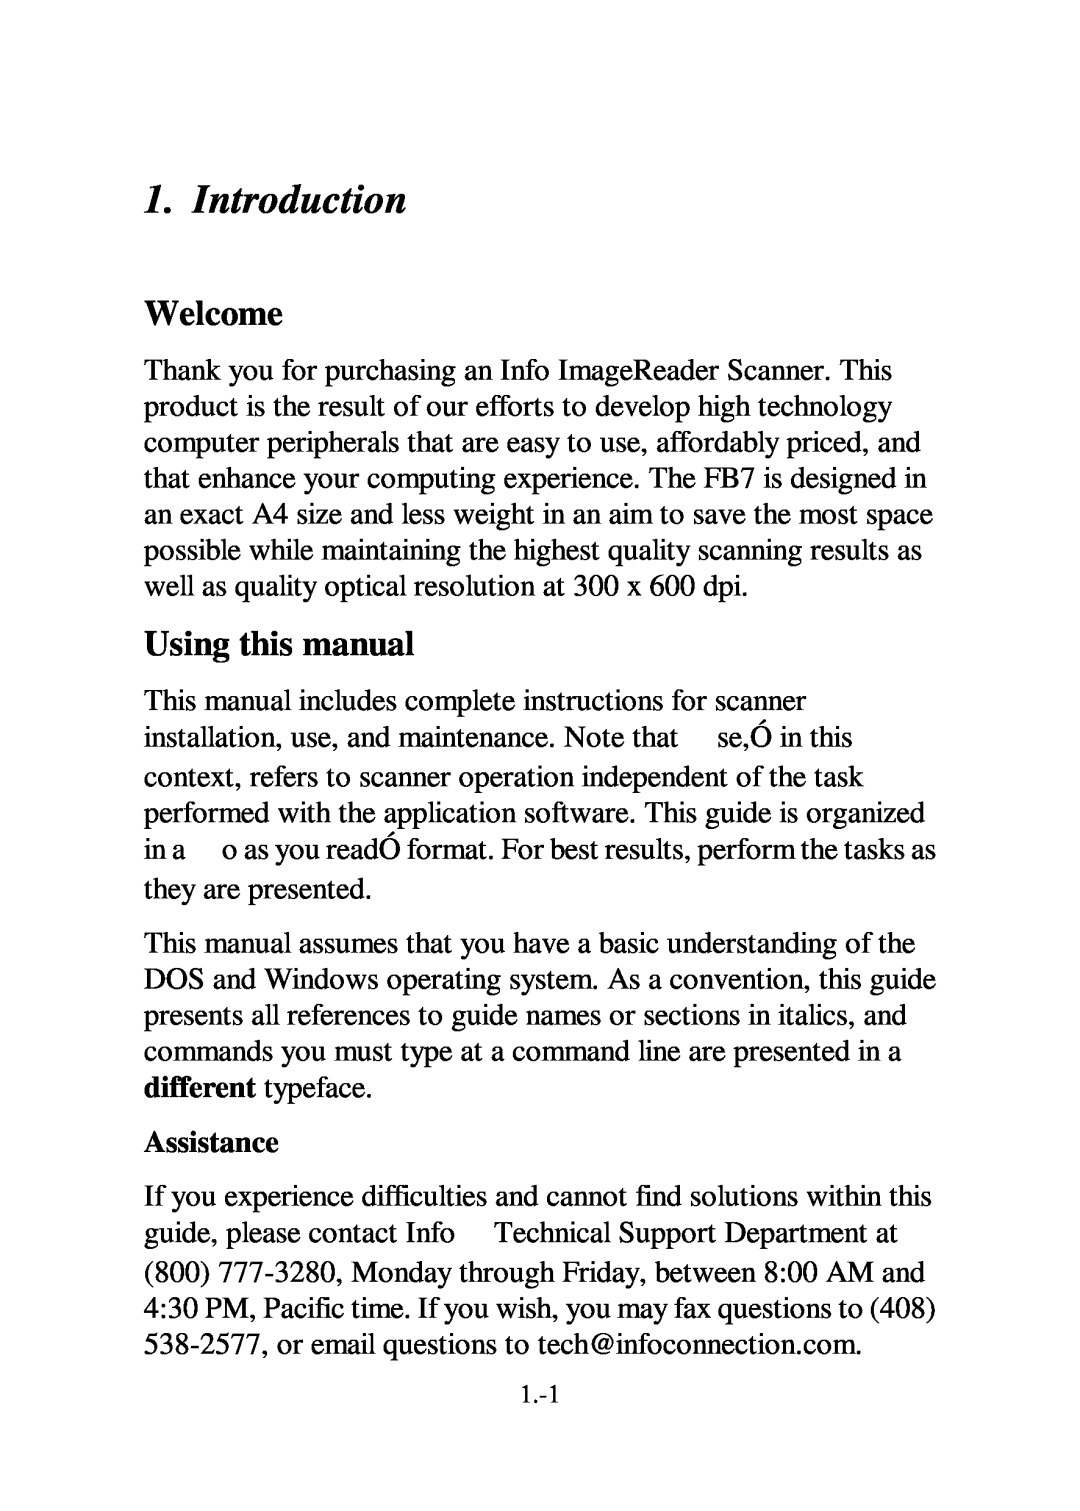 IBM Ricoh FB735 user manual Introduction, Welcome, Using this manual, Assistance 